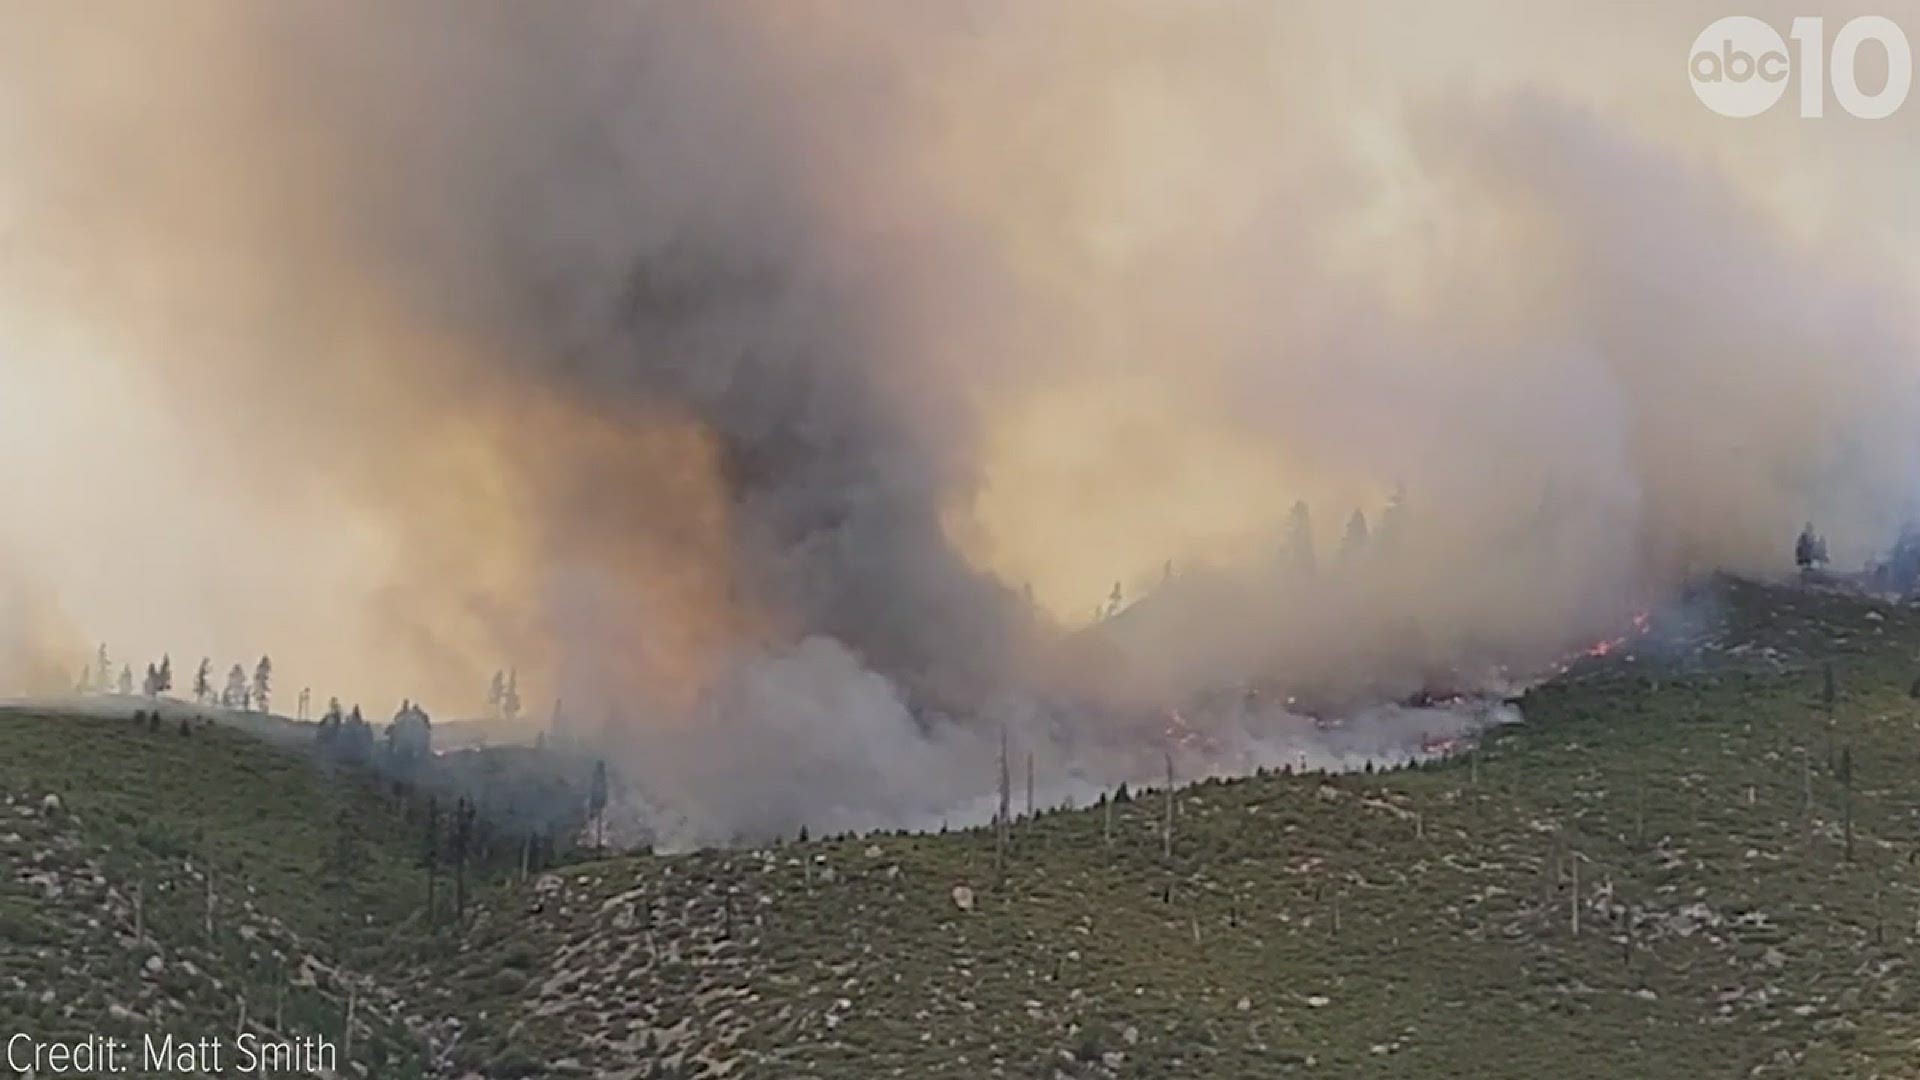 Here is a closer look at the Tamarack fire burning in Markleeville.